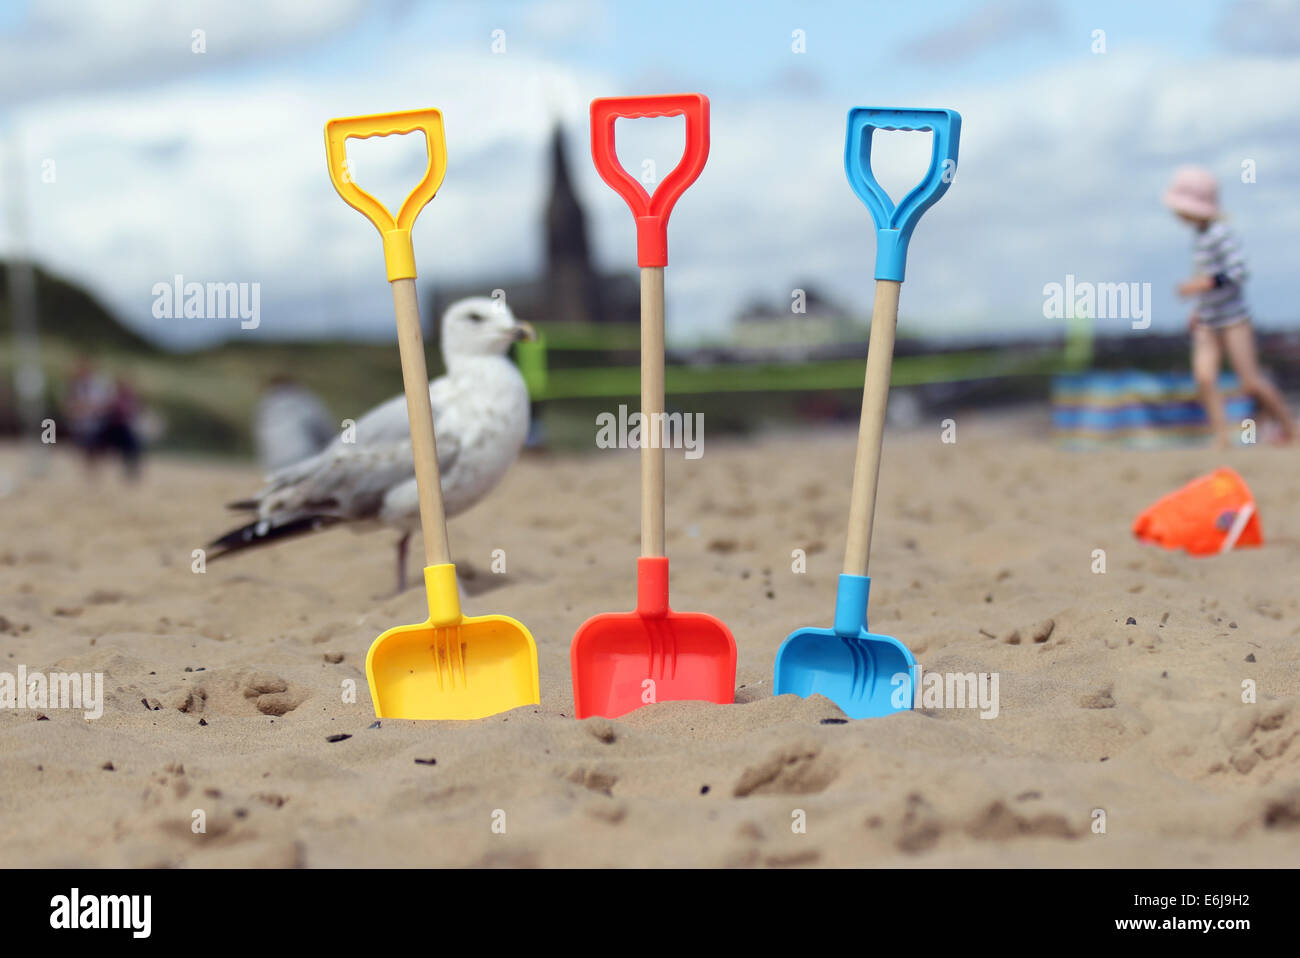 British summer beach scene taken at Tynemouth on the East coast of England featuring sand, spades, gull, child and church Stock Photo